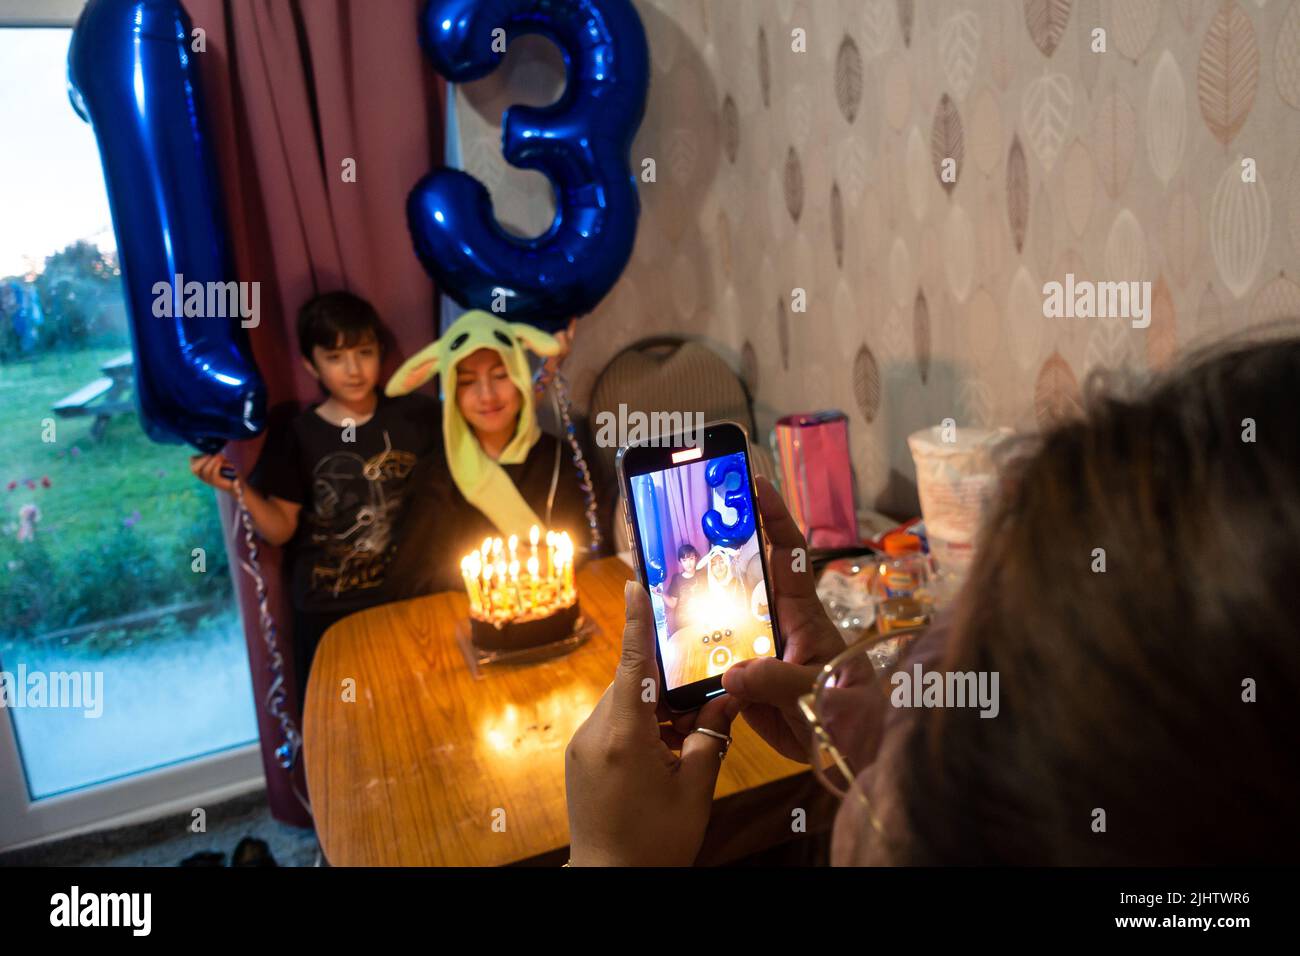 A mum takes a photo with her mobile phone of her two sons celebrating the eldest son's birthday with helium balloons and birthday cake with candles. Stock Photo